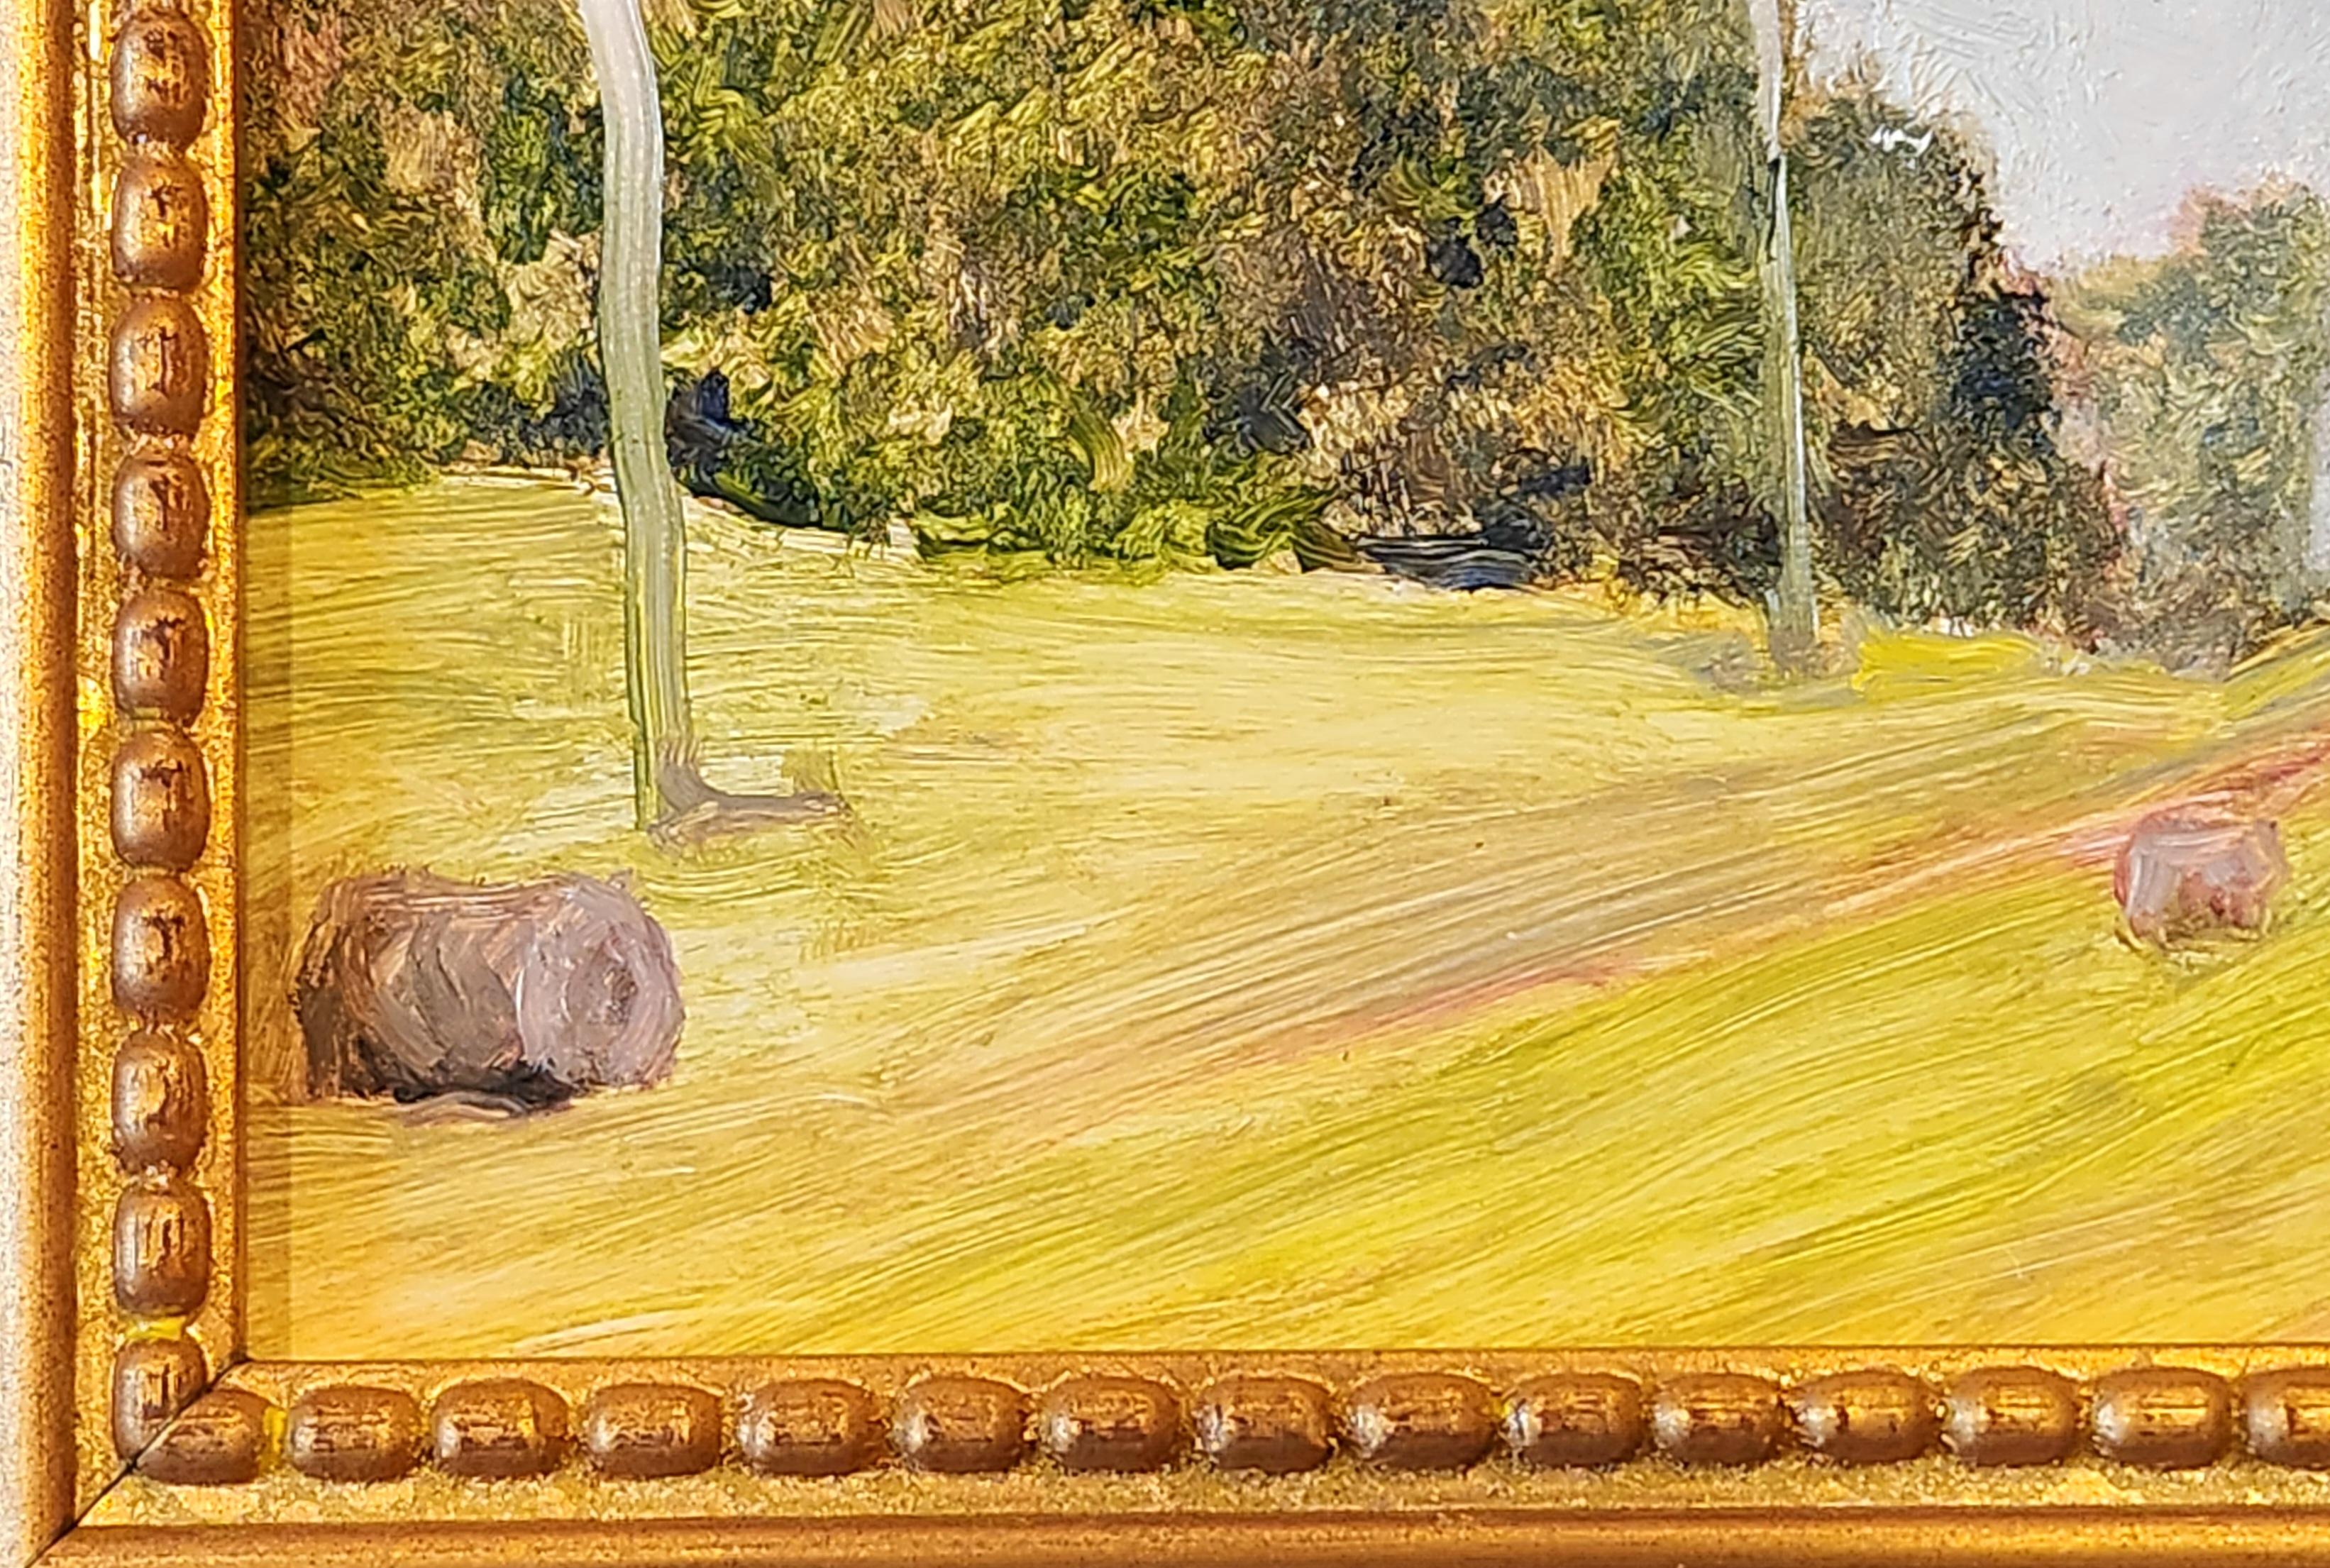 Oil on Canvas Painting.-- Wapner's Hay Bales 3